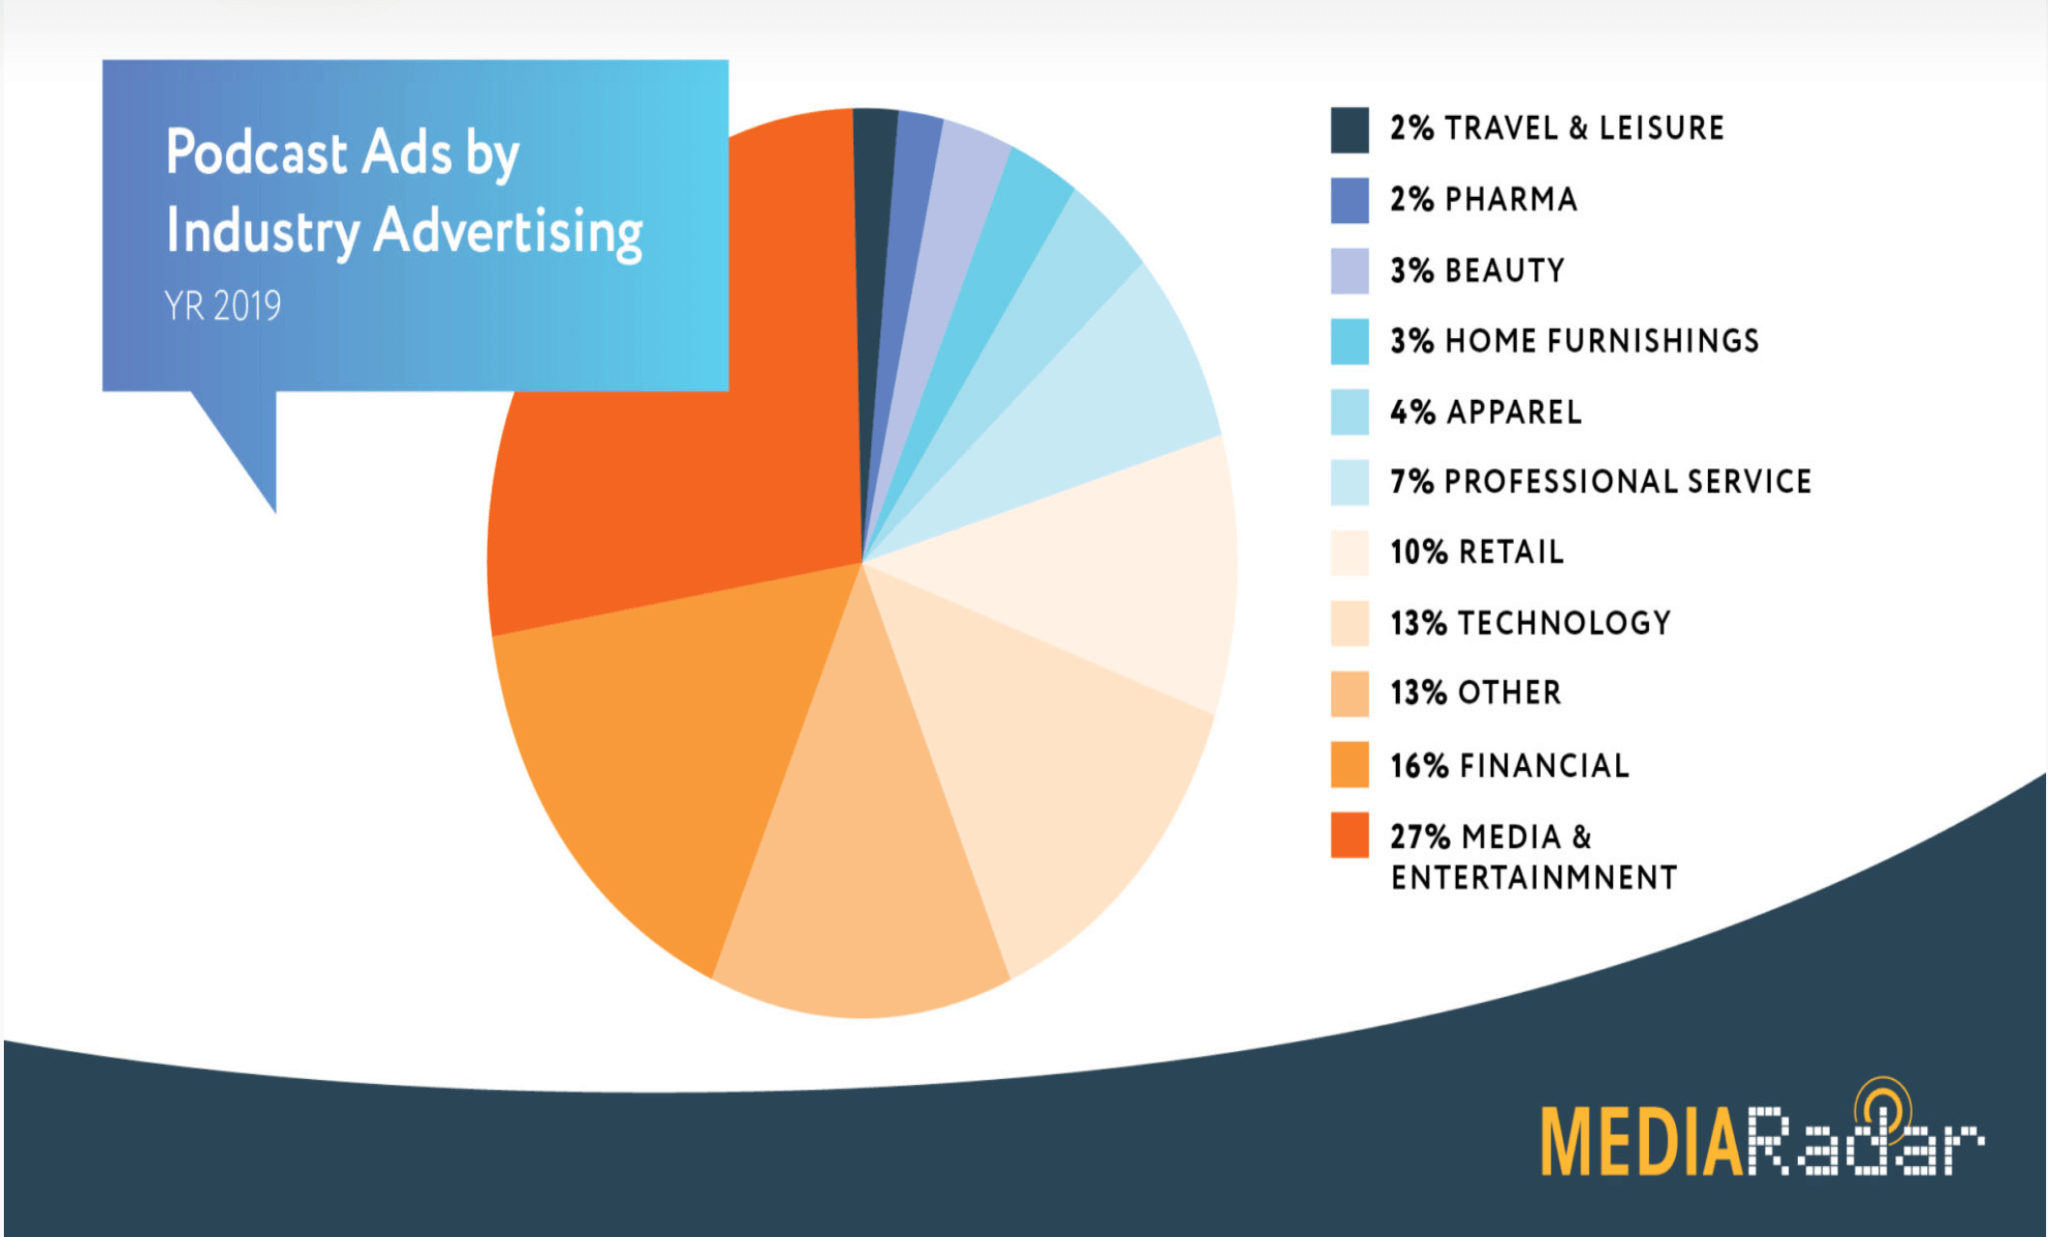 Pie chart of the percentage of Podcast ads according to industry